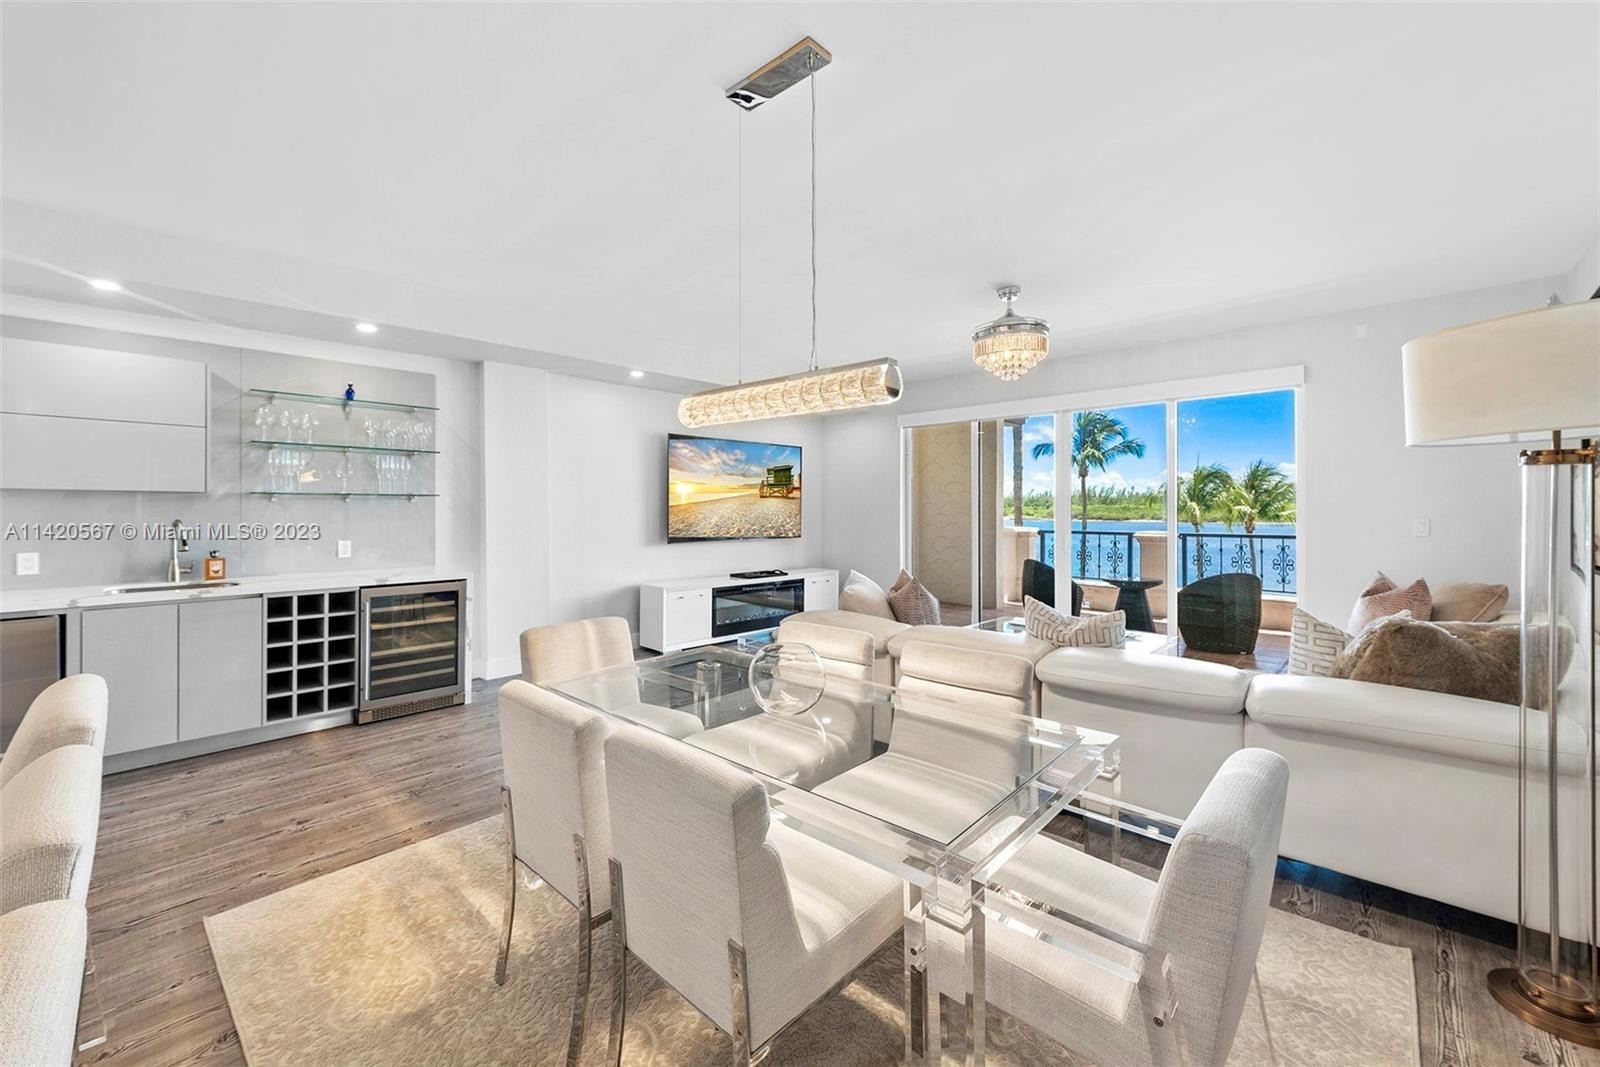 2. 2235 Fisher Island Dr